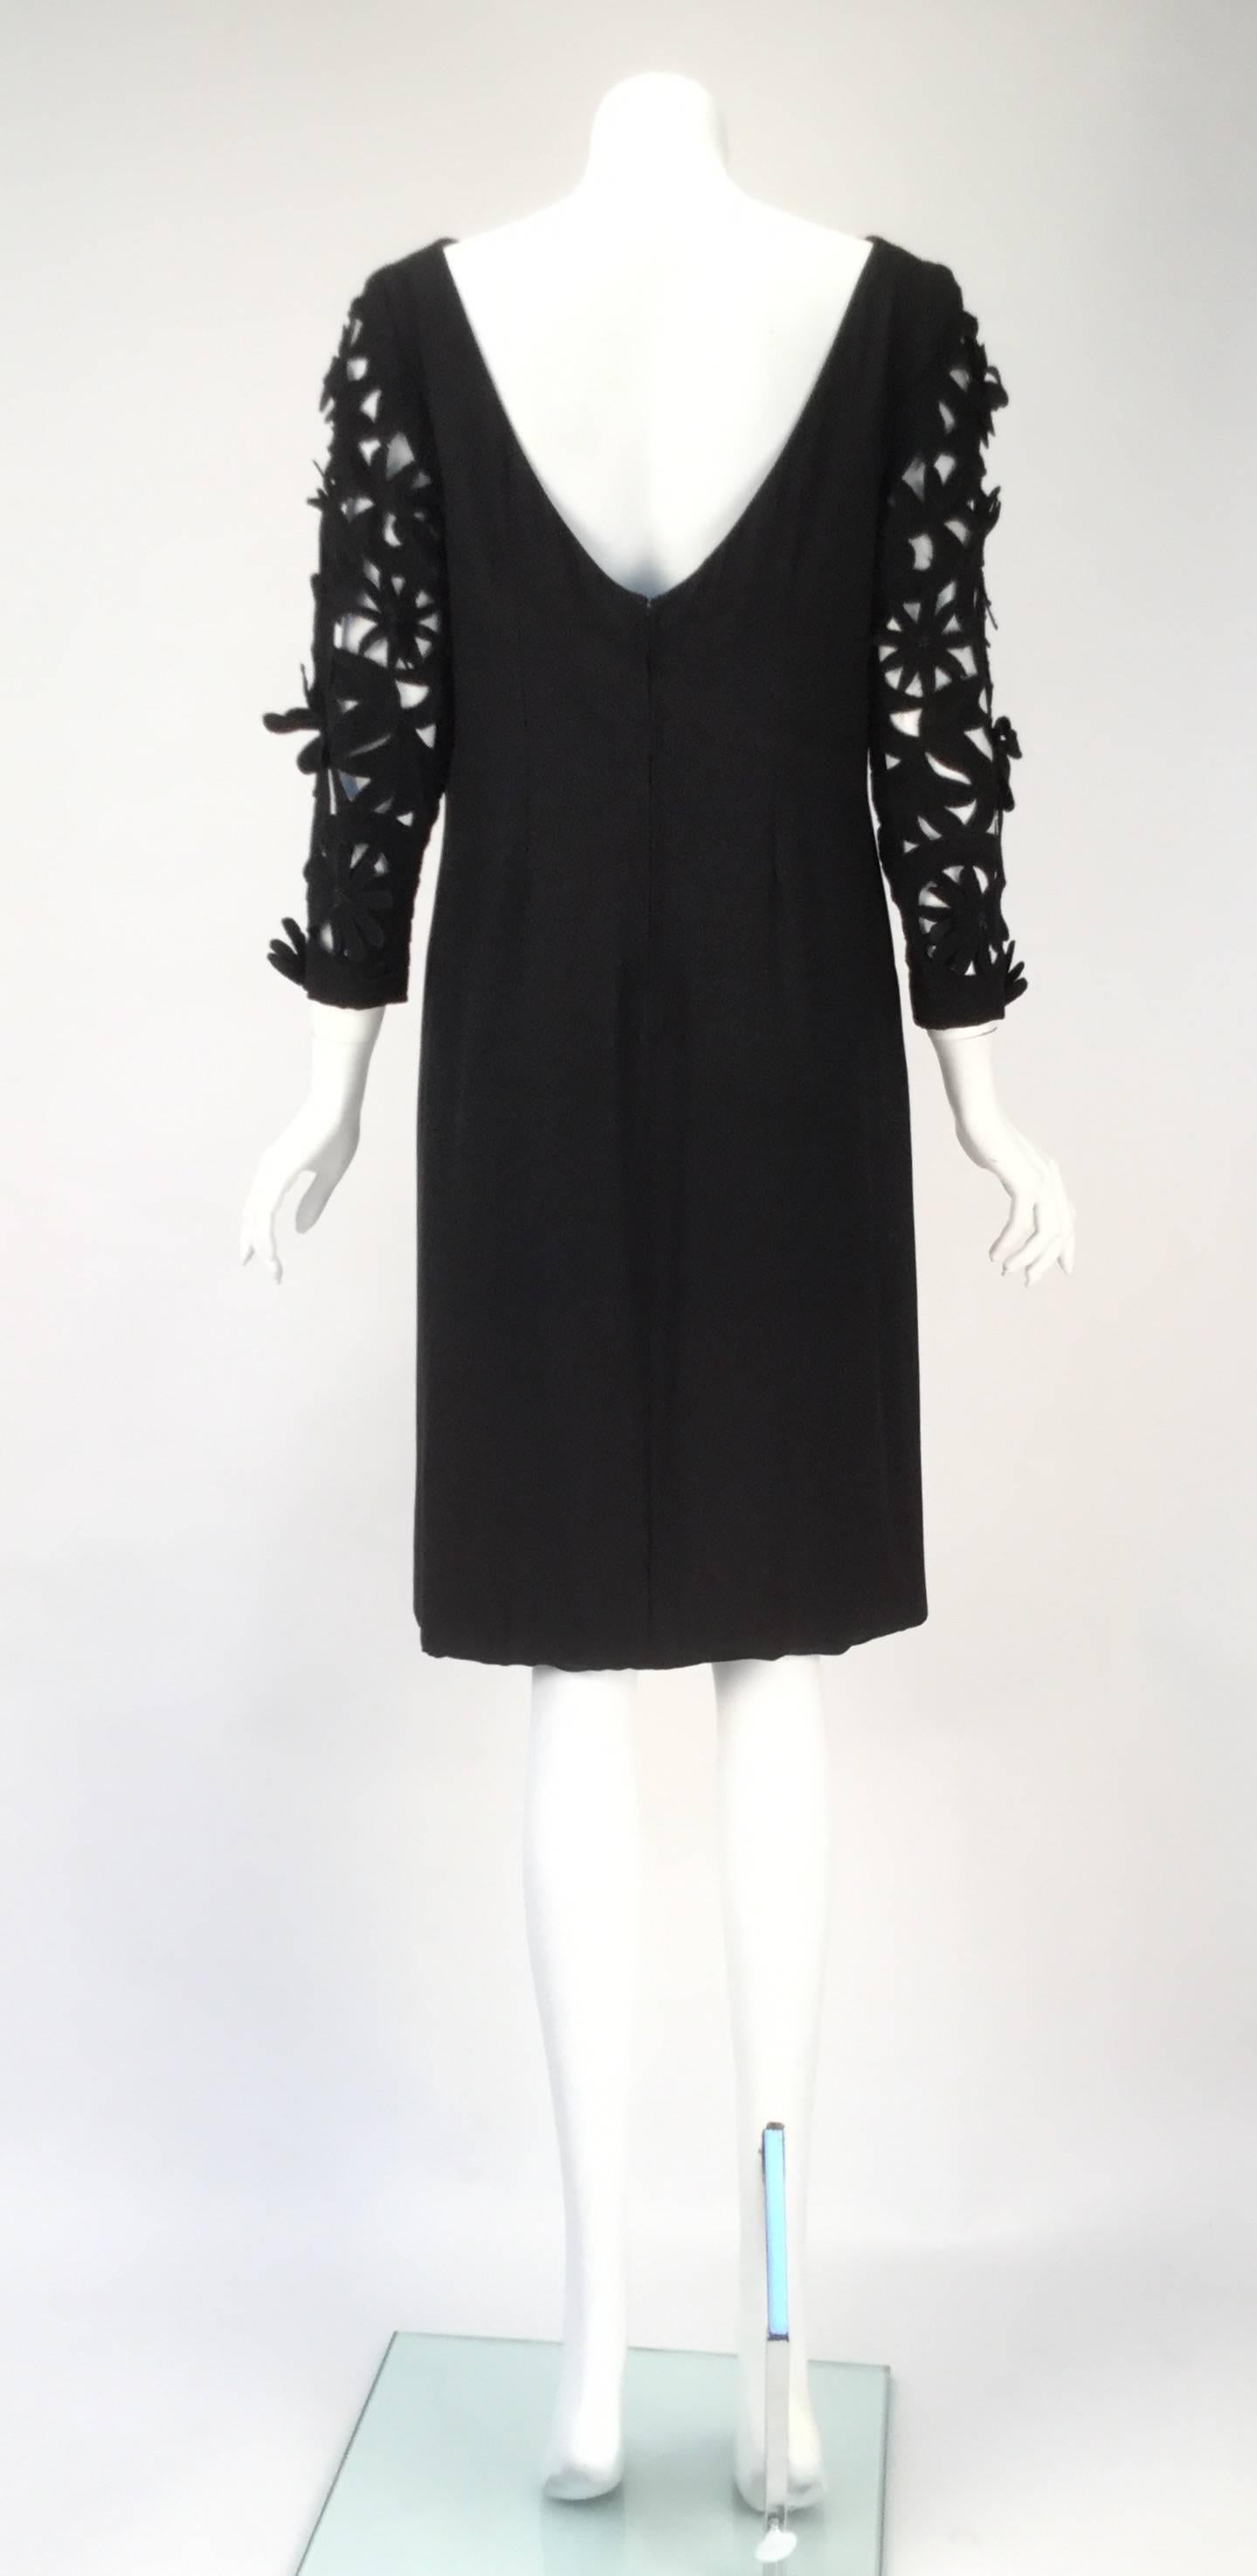 Women's 1970s Renato Balestra  Black  Dress with Floral Cutout Sleeves For Sale